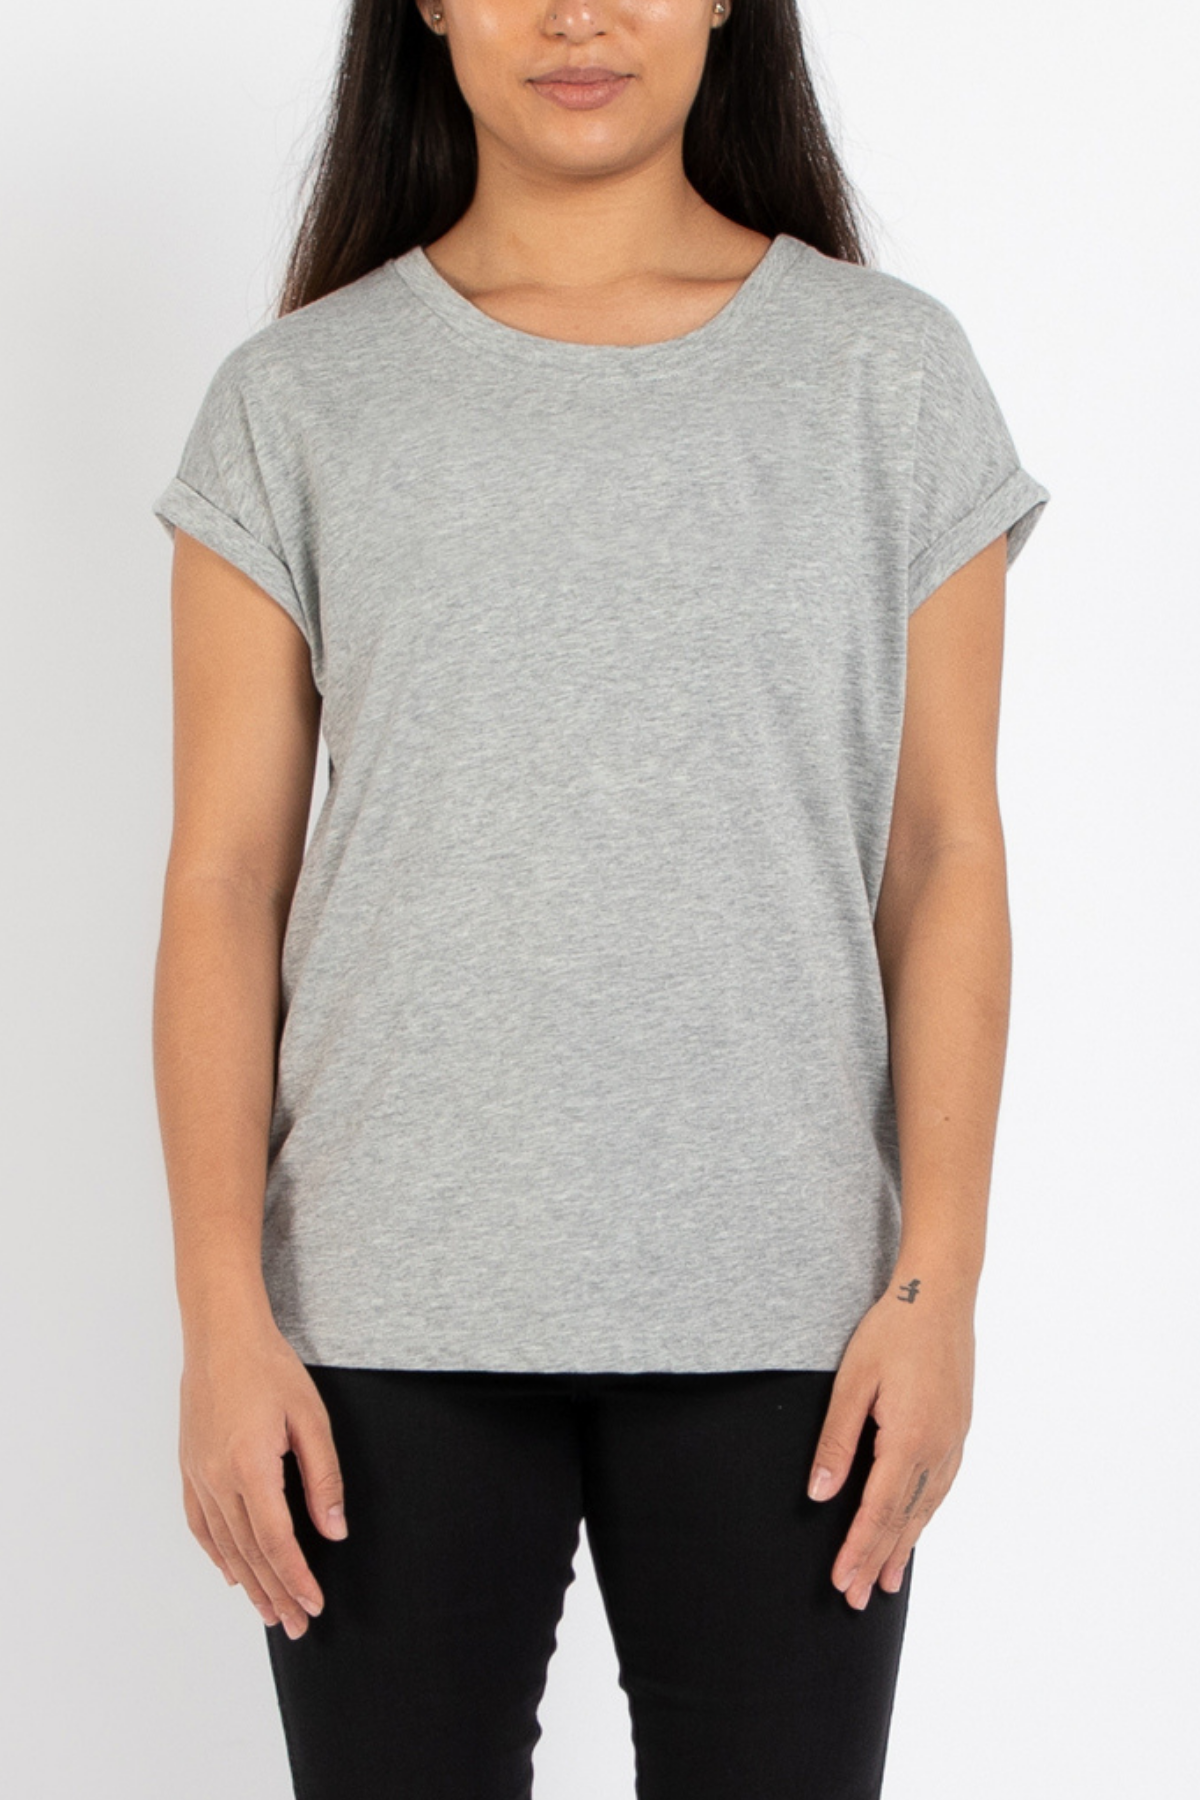 Dorsu Relaxed Crew Tee in Grey Marle, available on ZERRIN